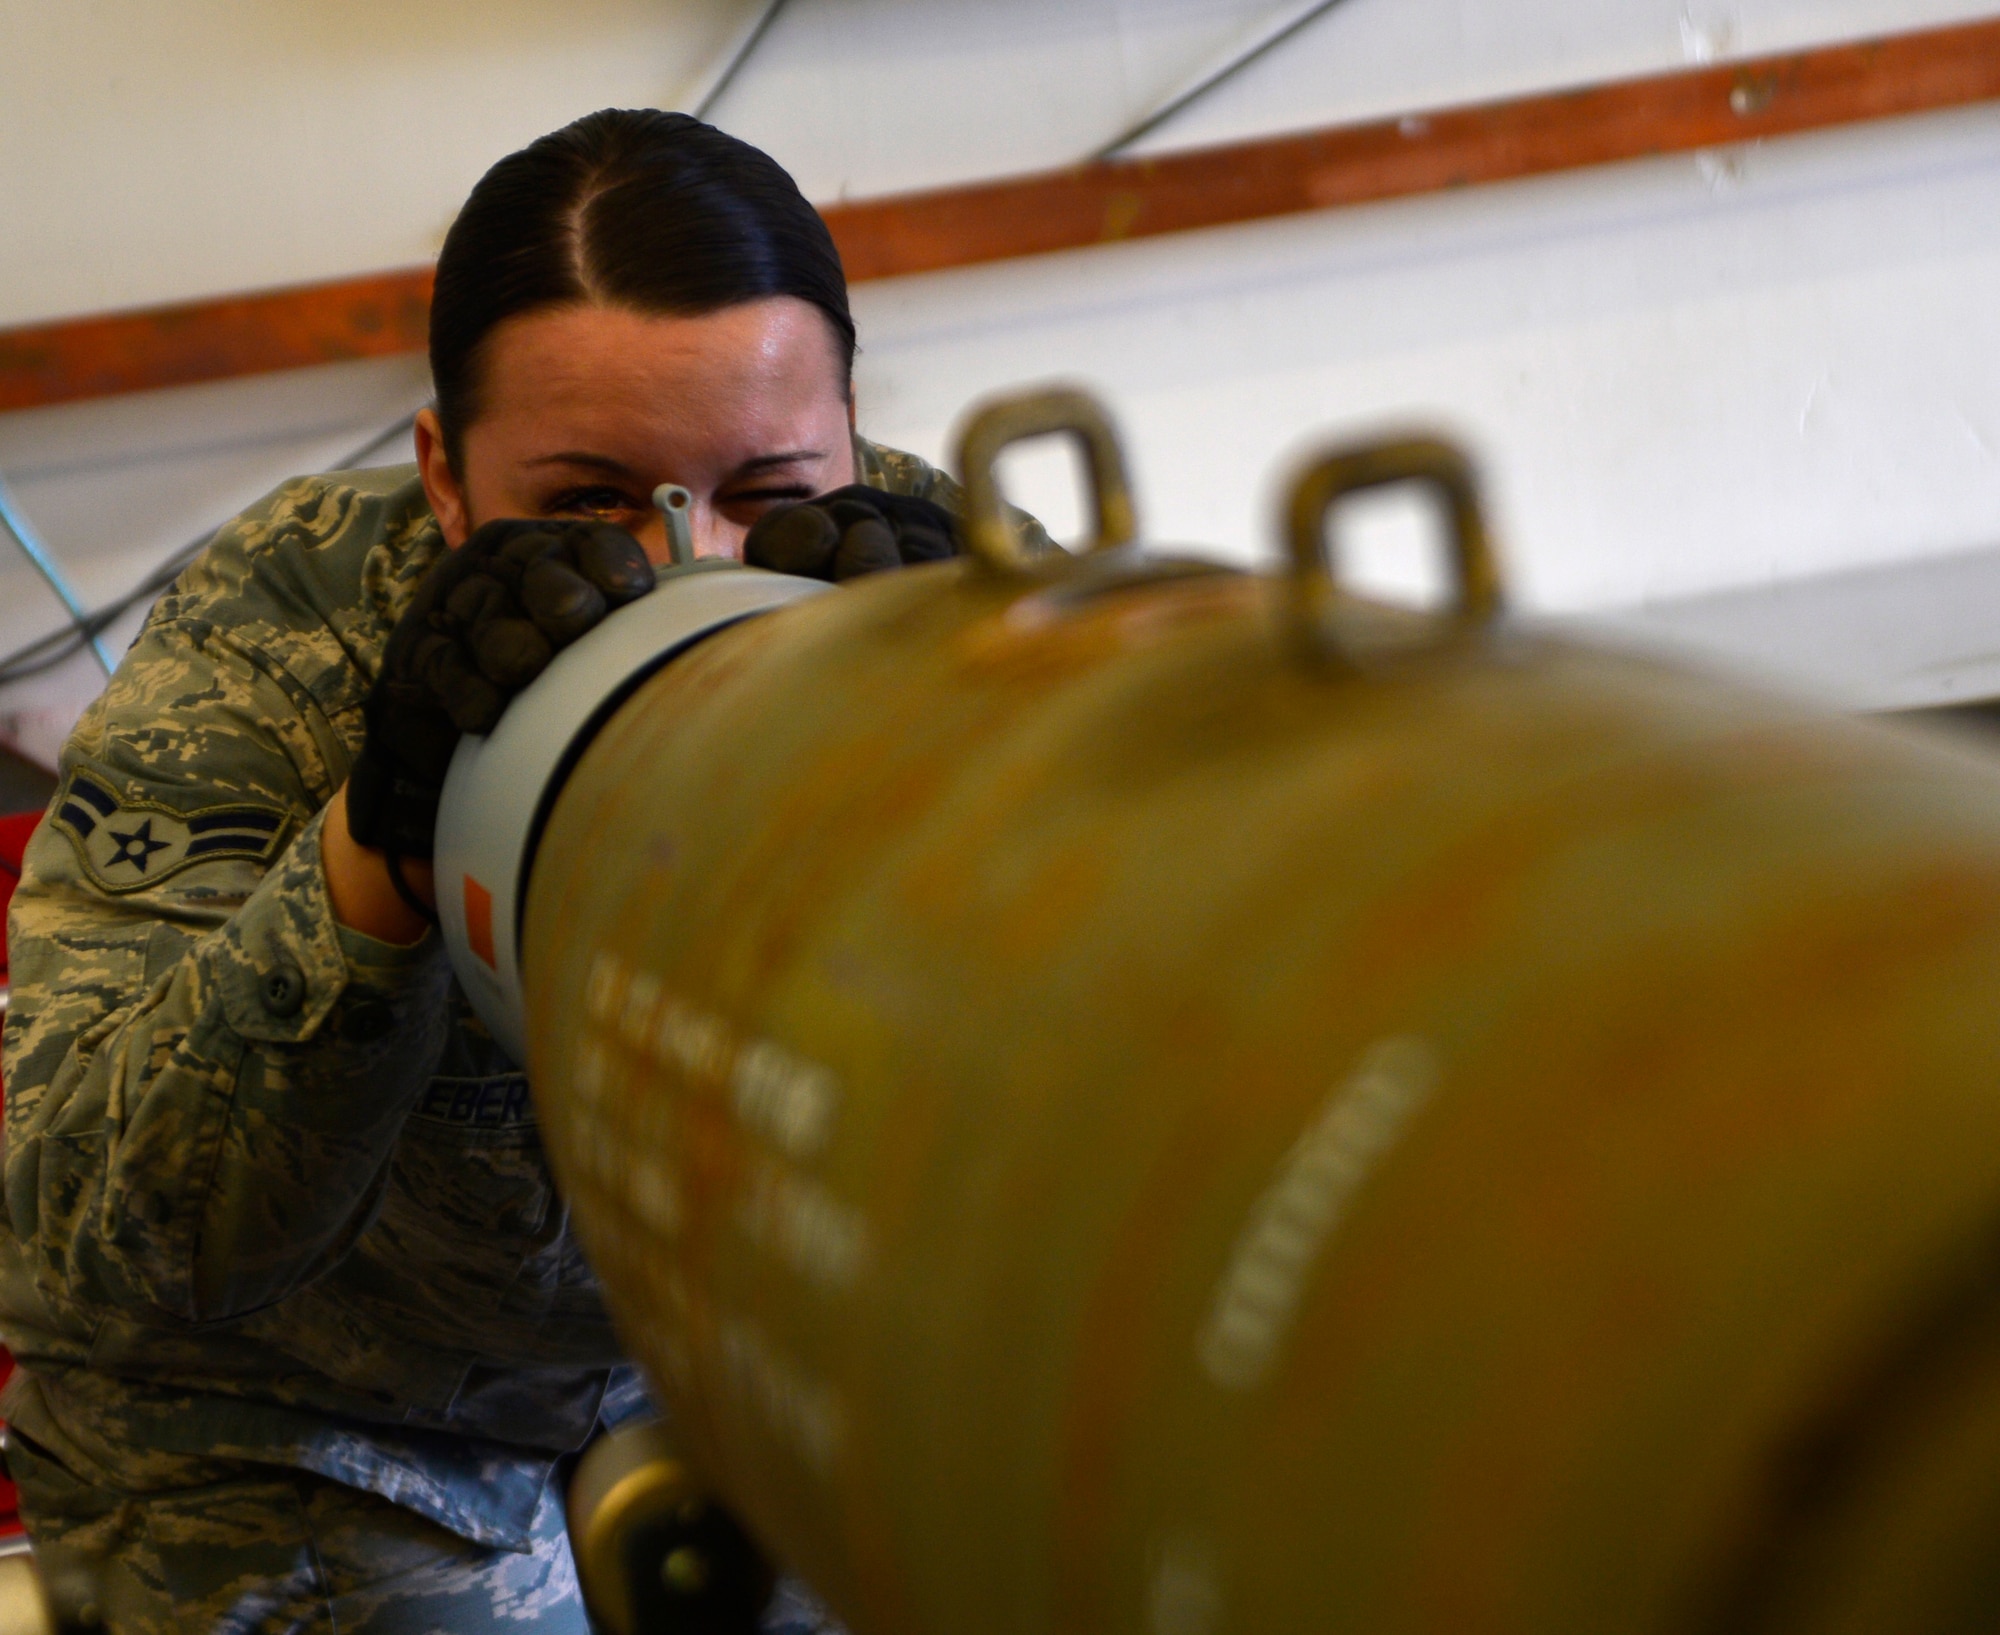 Airman 1st Class Karen, 432nd Maintenance Squadron munitions flight crew members, inspects a GBU-12 Paveway II laser-guided bomb during a build March 1, 2016, at Creech Air Force Base, Nevada. On August 31, 1949, Secretary of Defense Louis Johnson announced the creation of an Armed Forces Day to replace separate Army, Navy, Marine Corps and Air Force Days.  (U.S. Air Force photo by Senior Airman Christian Clausen/Released)